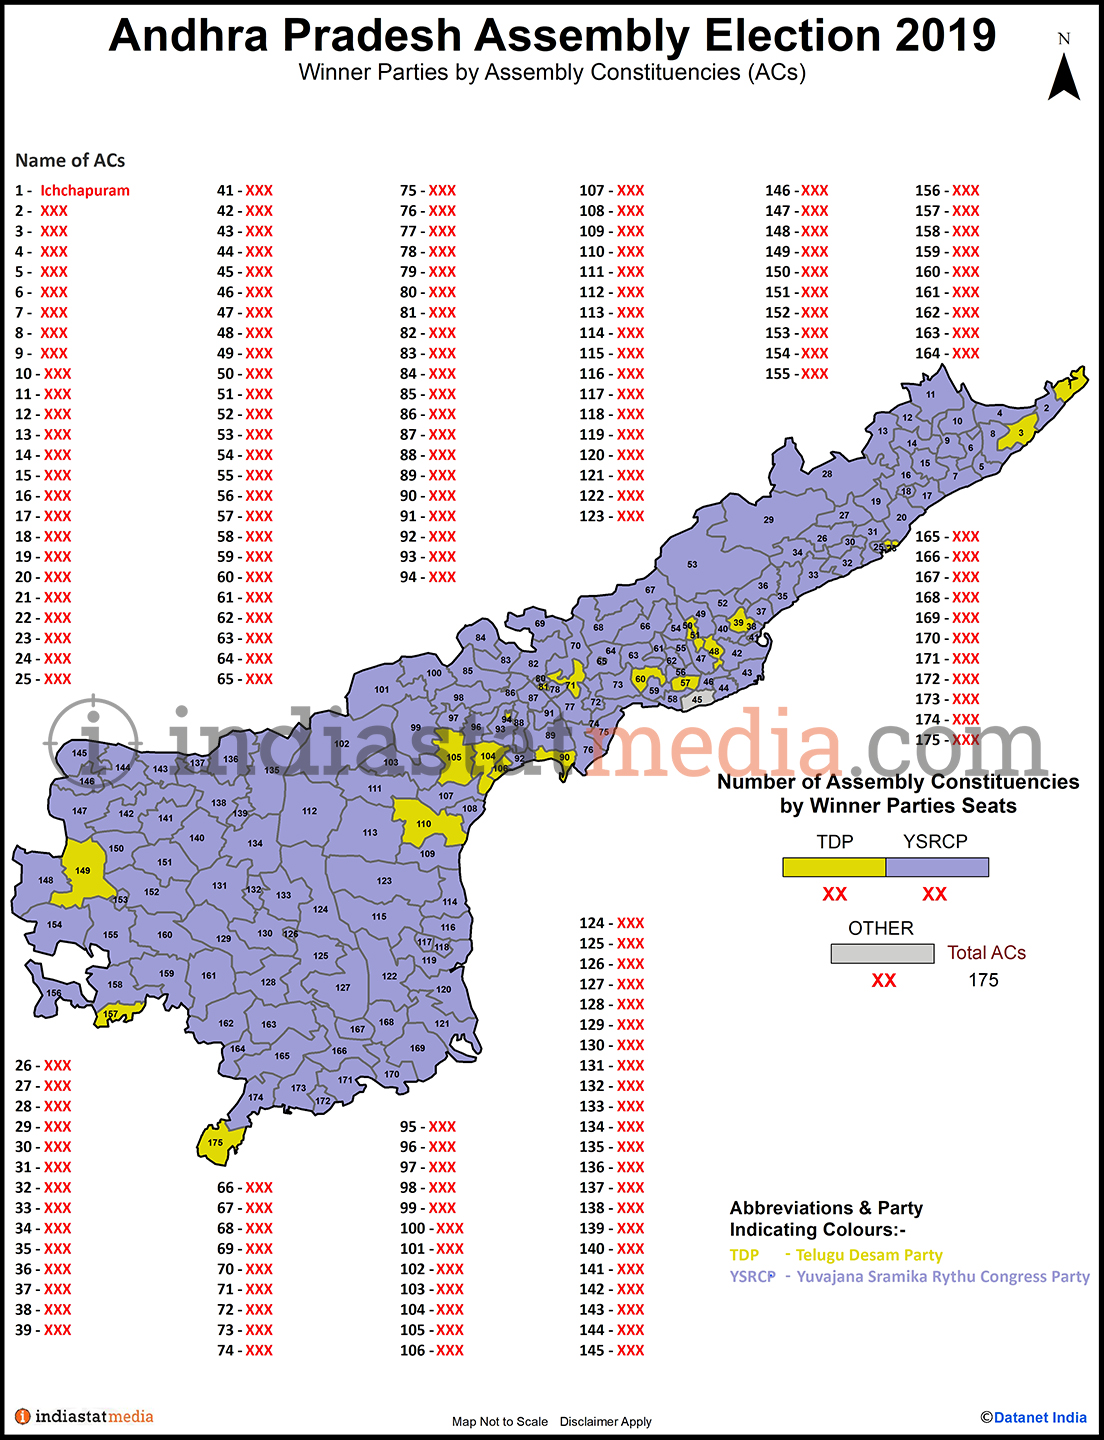 Winner Parties by Assembly Constituencies in Andhra Pradesh (Assembly Election - 2019)